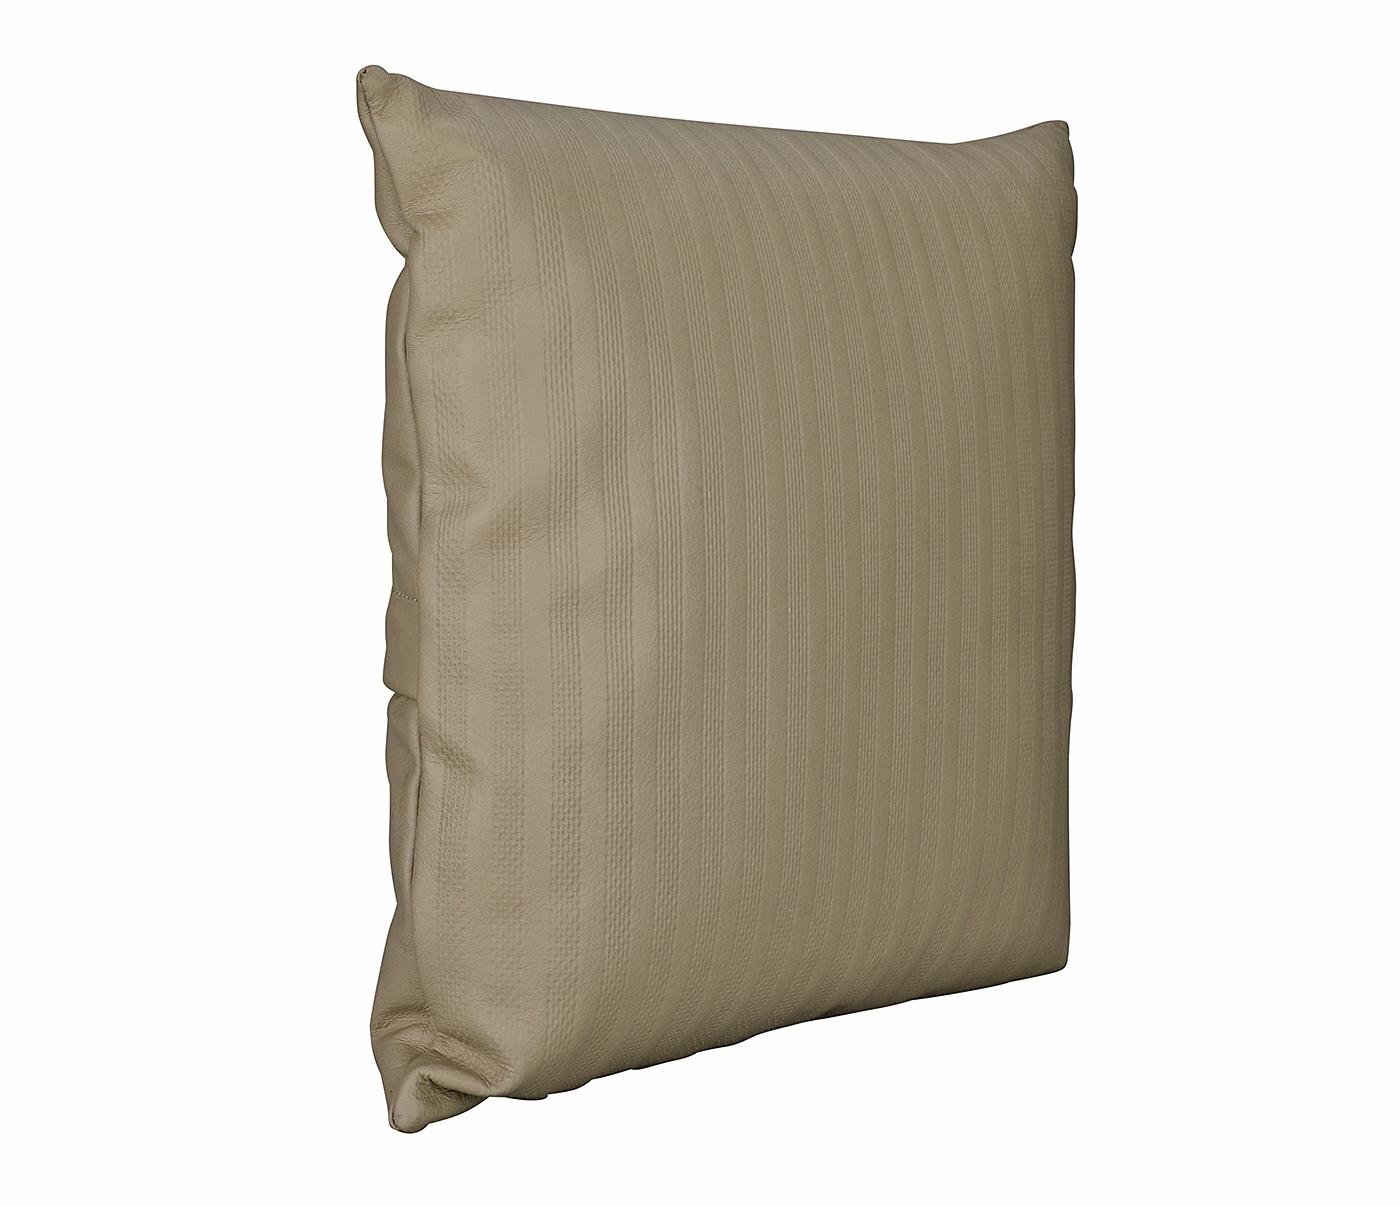 W348-Adamis-Tope Colour Pure Leather Cushion - Tope